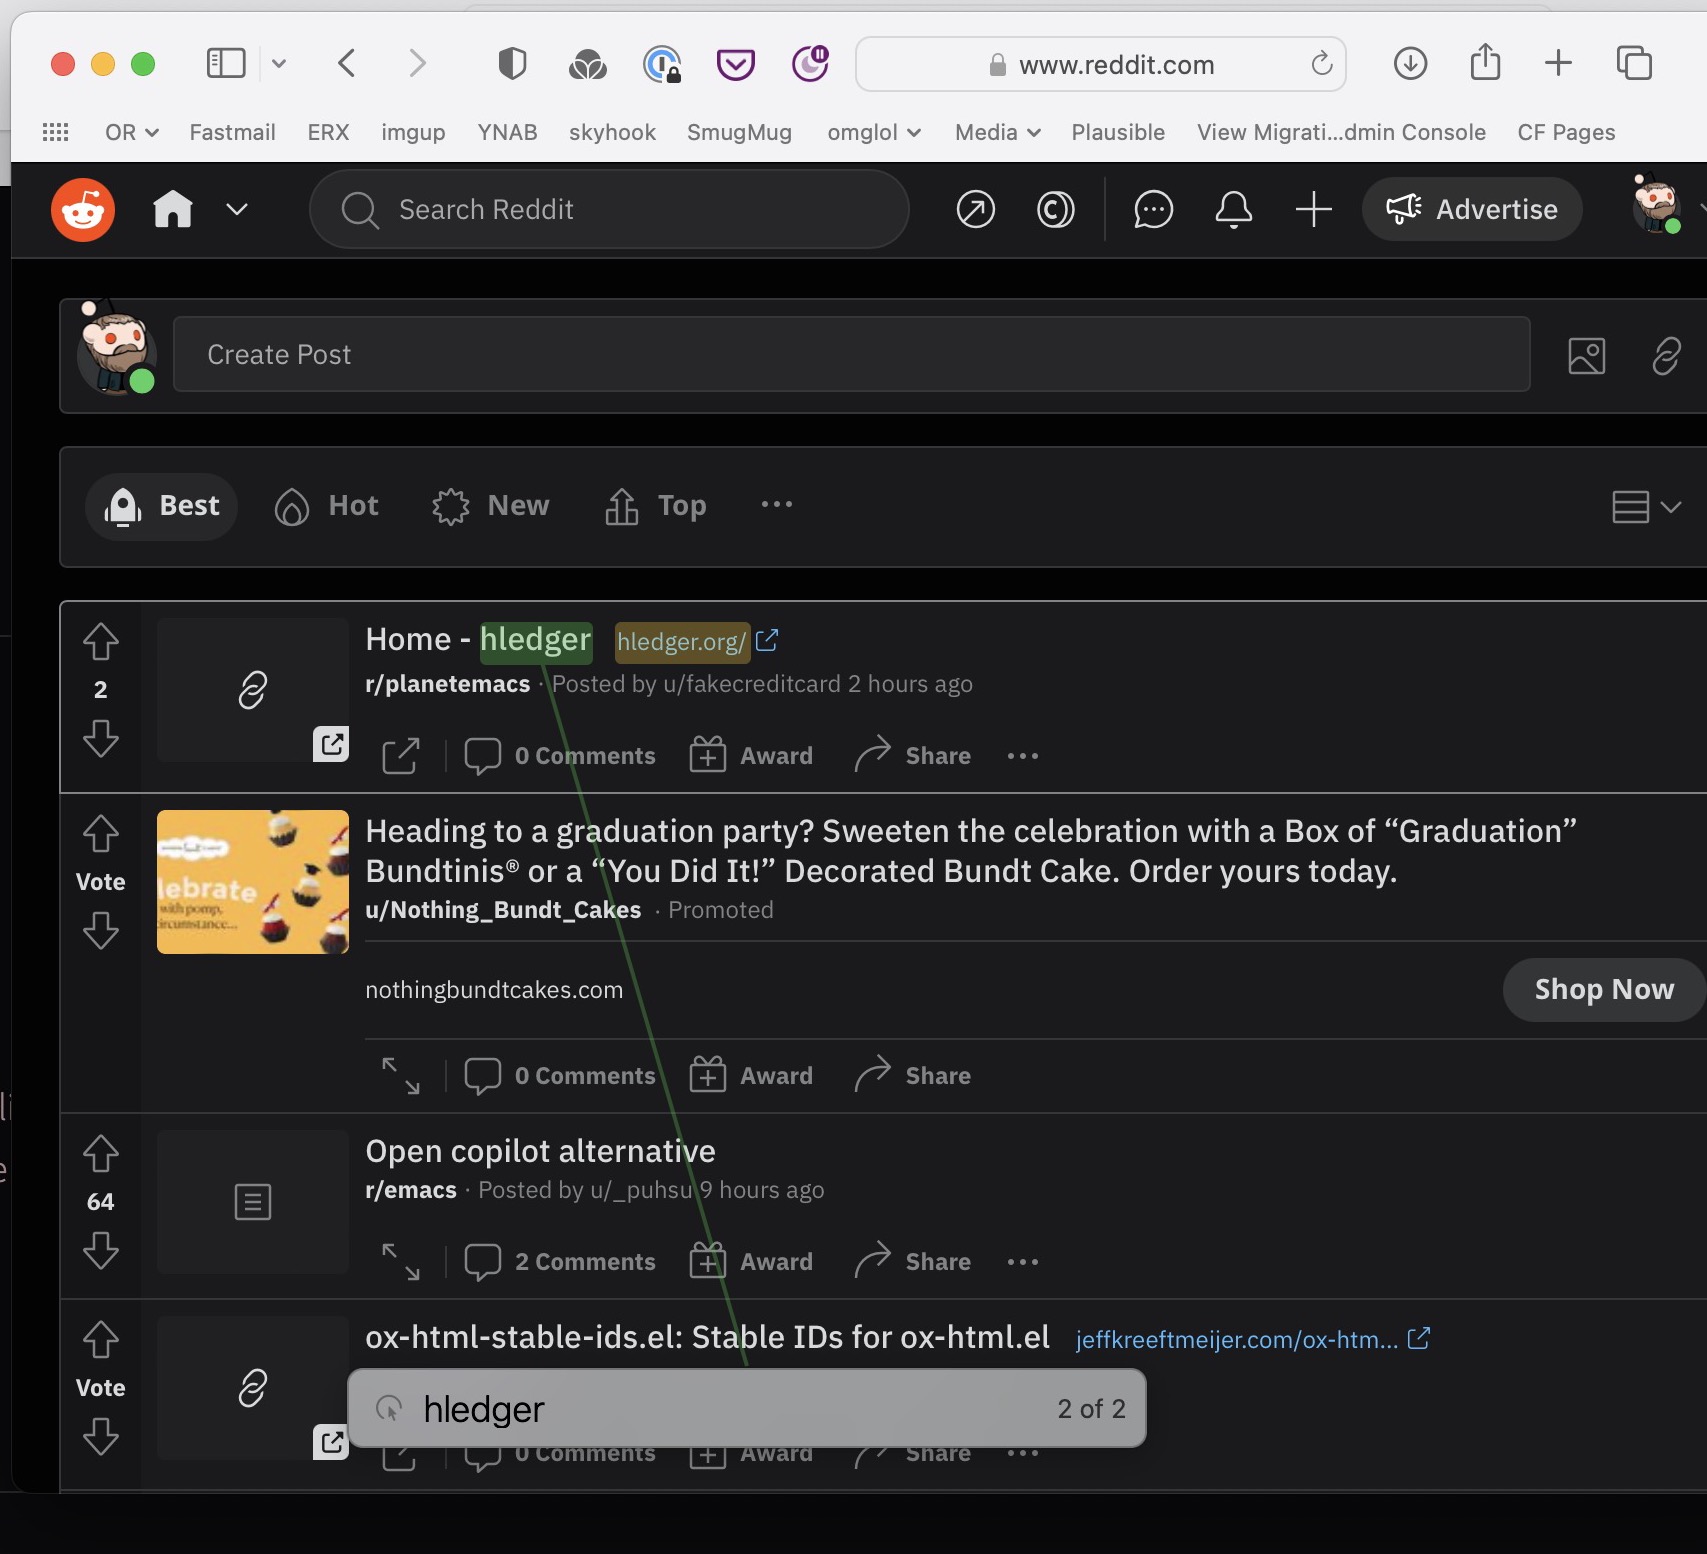 A screenshot of the reddit front page with a floating search field and a green line pointing to matching text